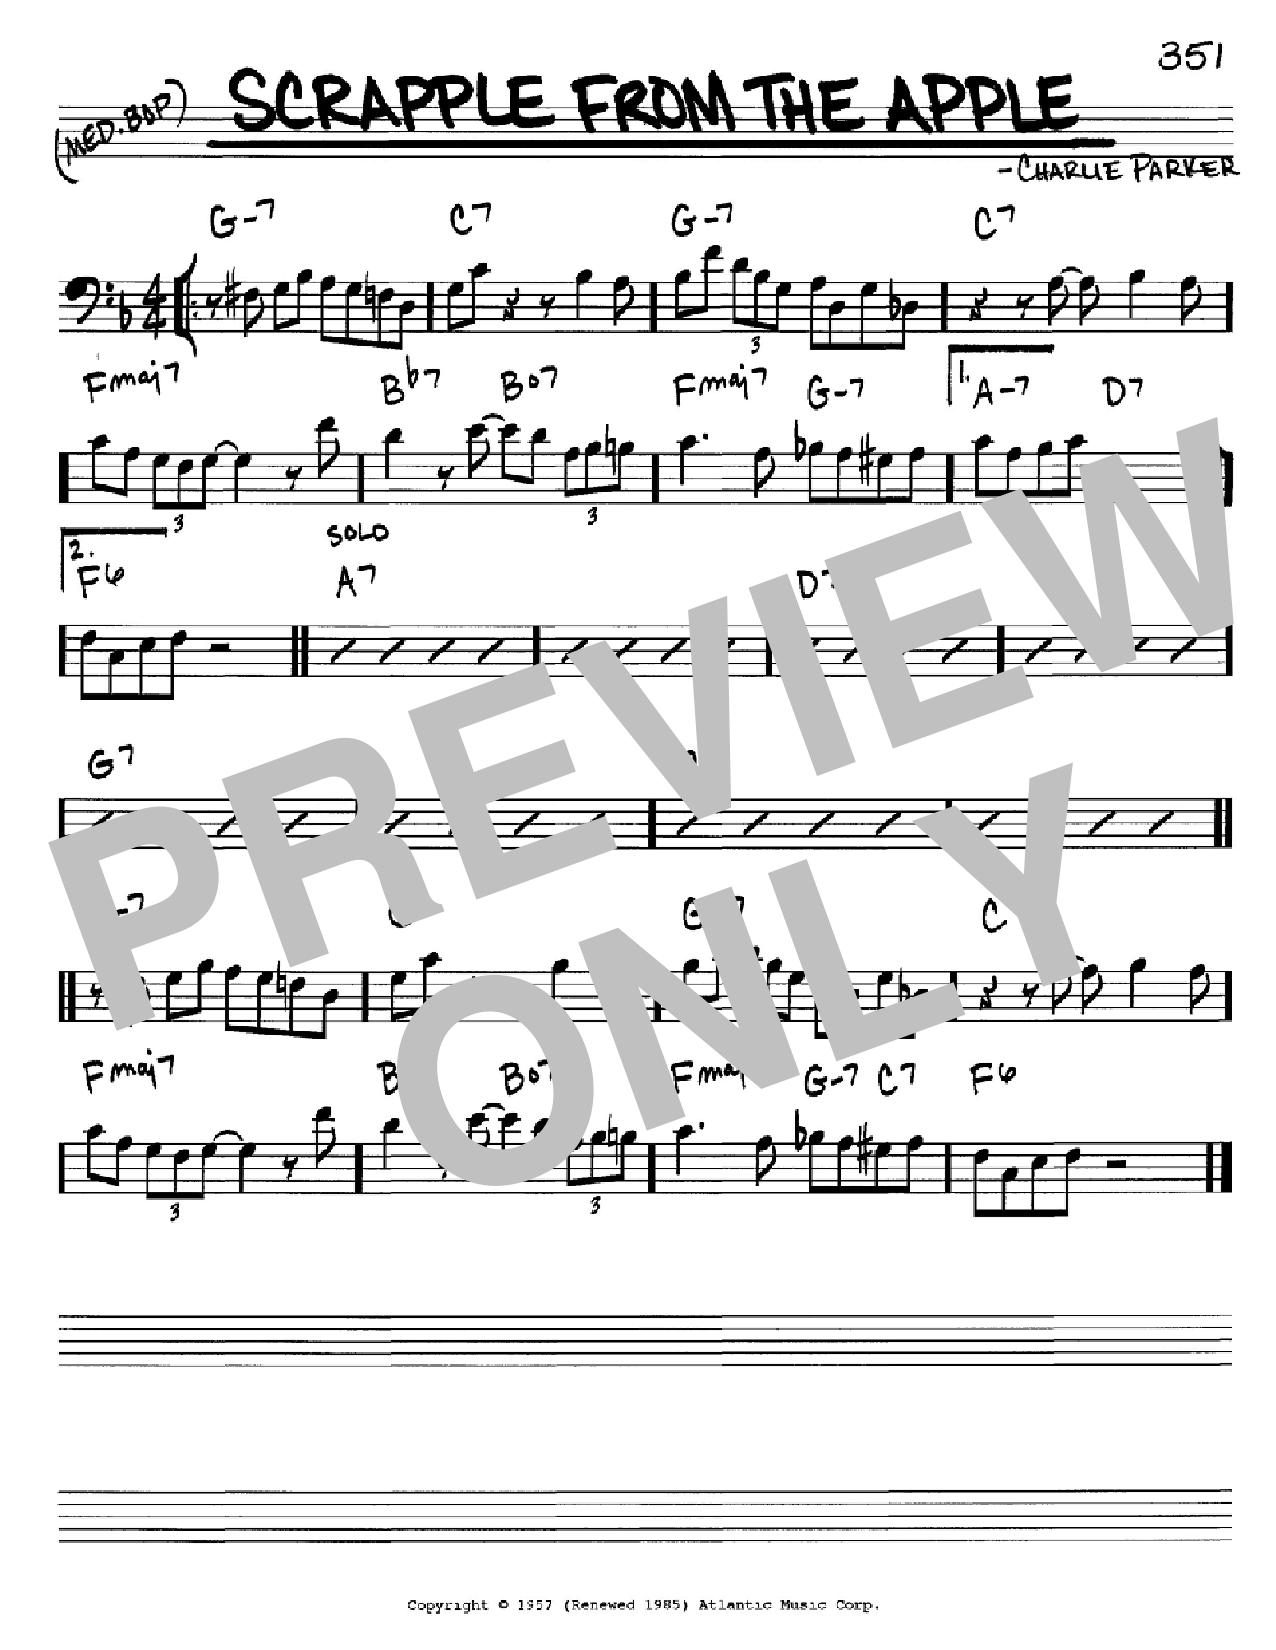 Download Charlie Parker Scrapple From The Apple Sheet Music